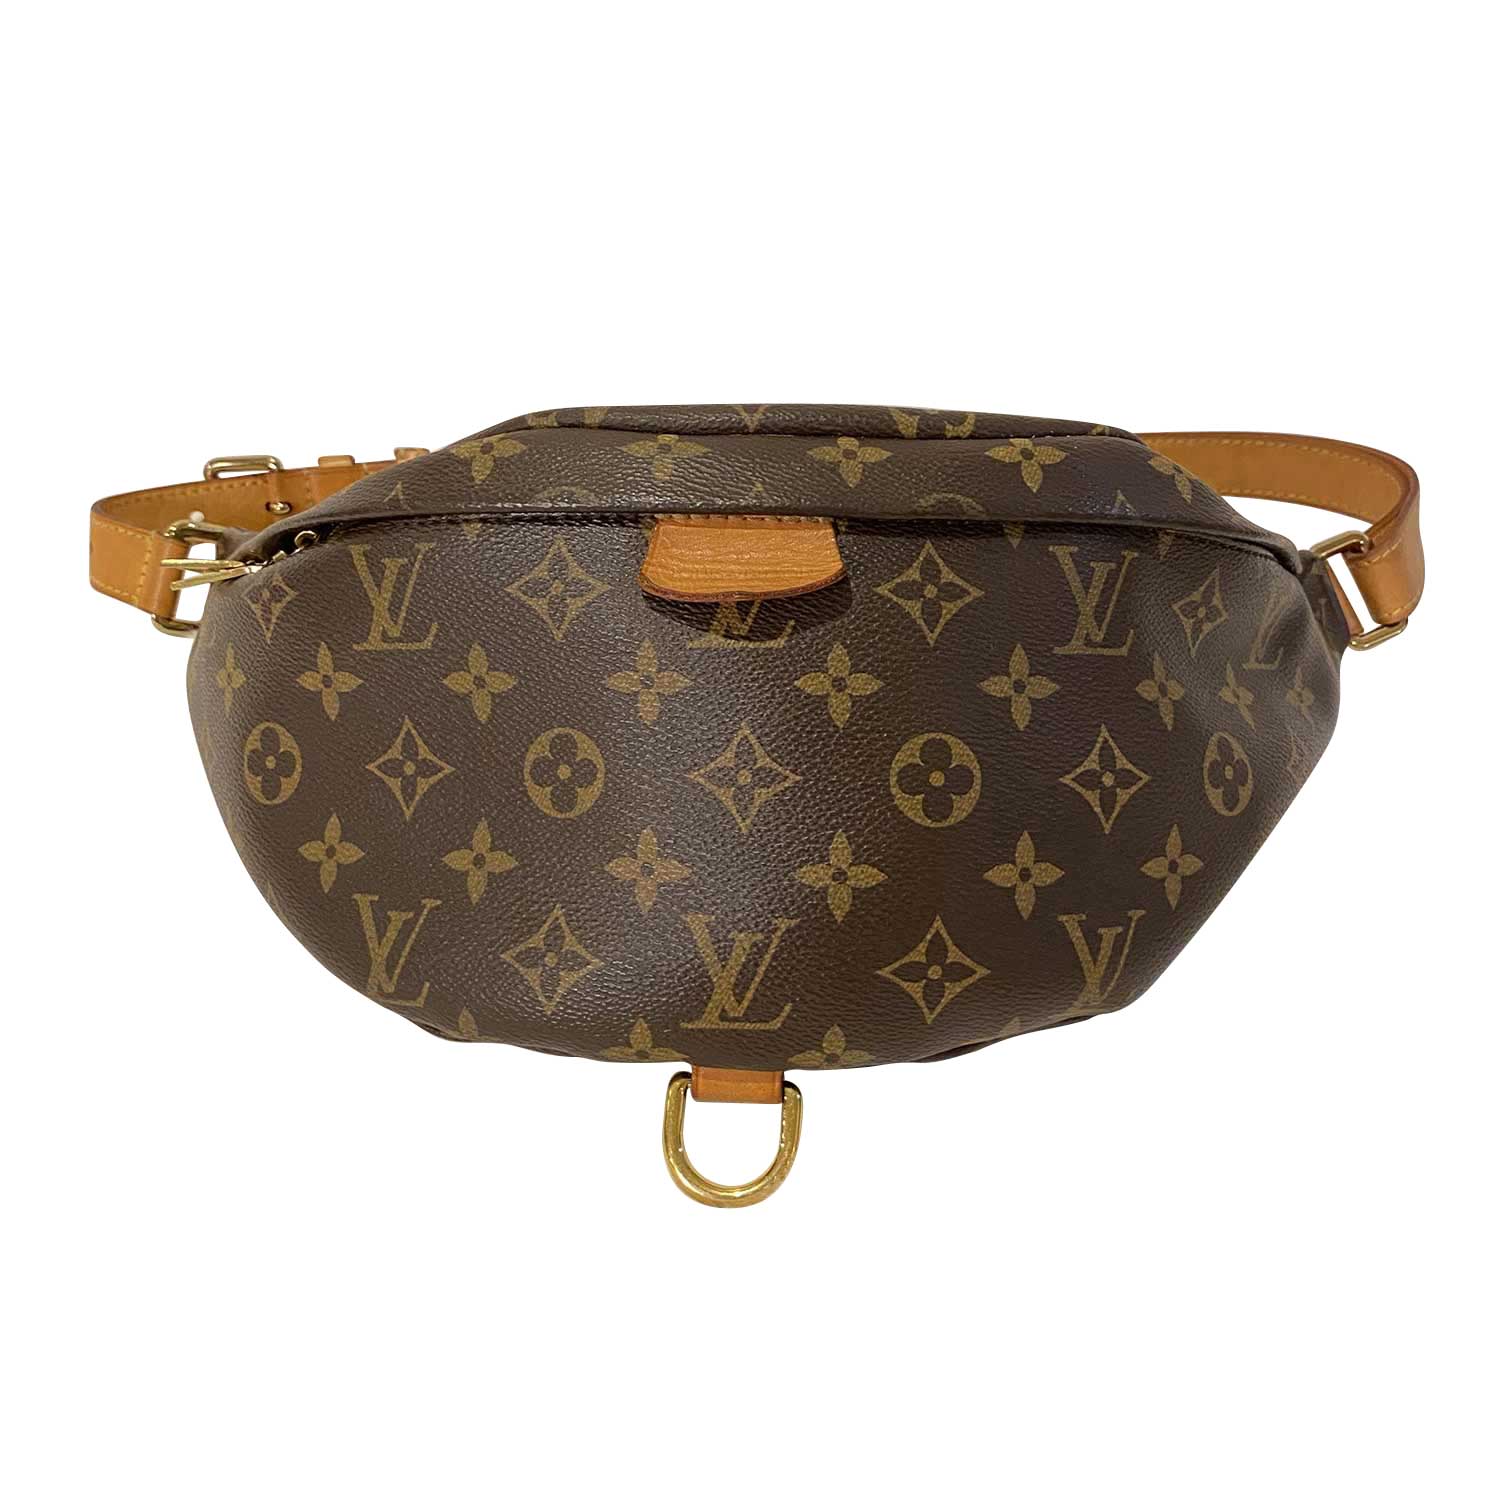 Mr Money - Today's Drop Louis Vuitton Bum Bag. Fashioned in classic  Monogram canvas and signed with a “Louis Vuitton Paris” leather patch, this  uber-functional Bumbag transforms sportwear into the very definition